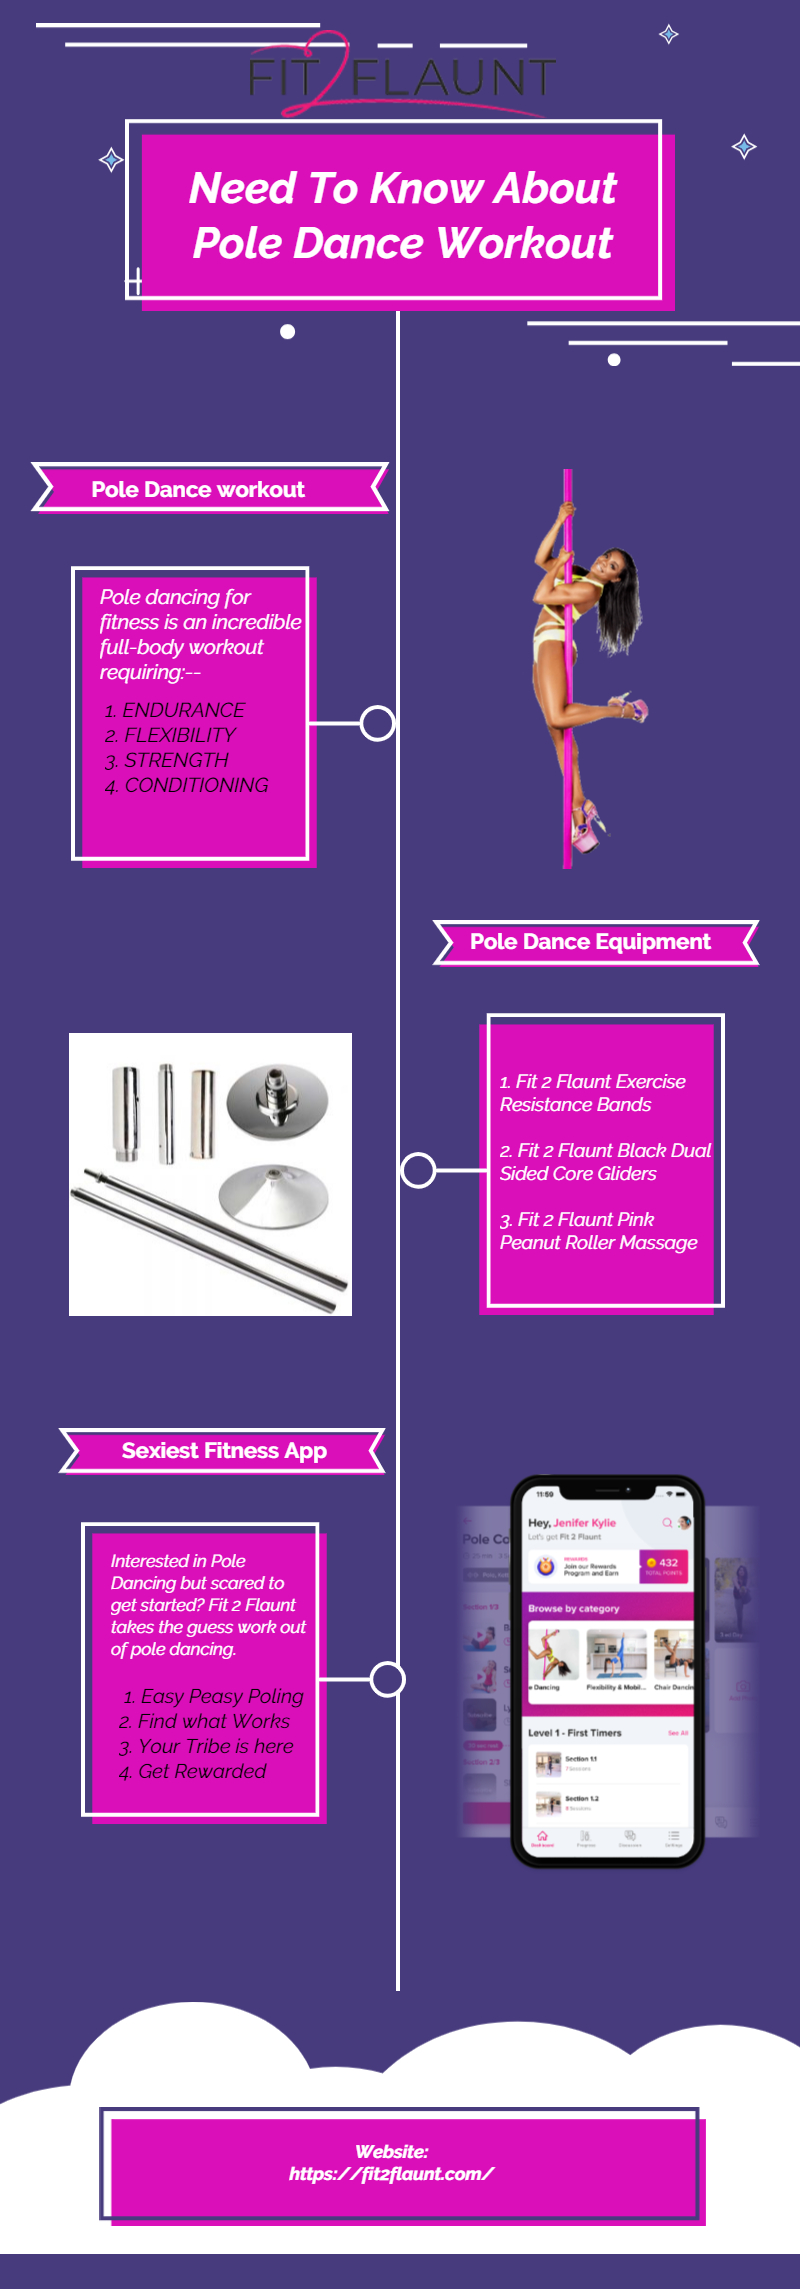 About Pole Dance Workout Fitness App By Fit2flaunt On Deviantart